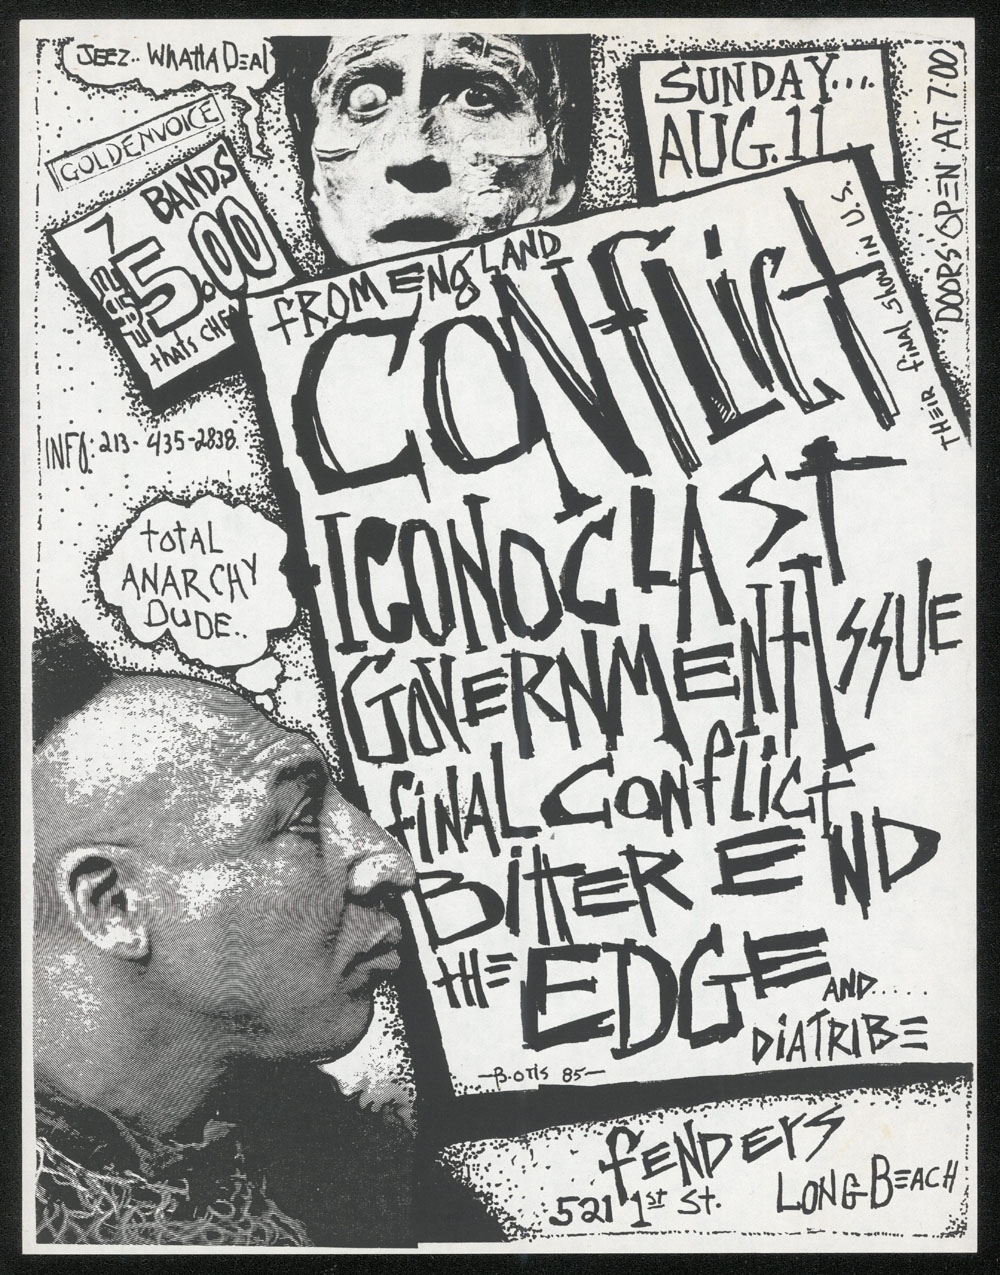 CONFLICT w/ Iconoclast, Government Issue, Final Conflict, Bitter End, The Edge, Diatribe at Fenders Ballroom